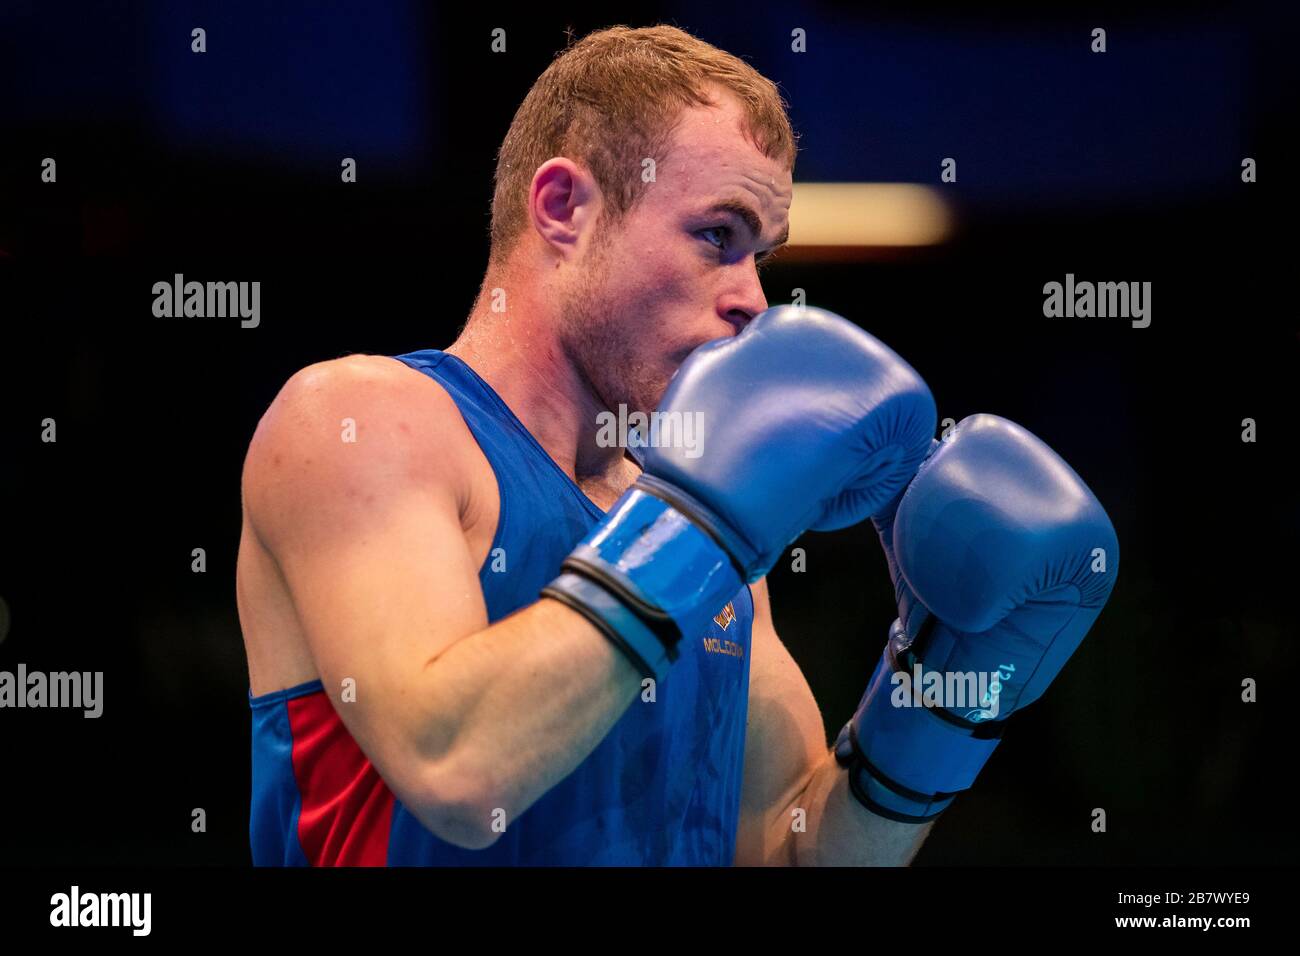 London, UK. 14-03-20. Besart Pireva (KOS) RED fights Andrei Vreme (MDA) BLUE during the Road to Tokyo European Olympic Boxing Qualification Event Stock Photo